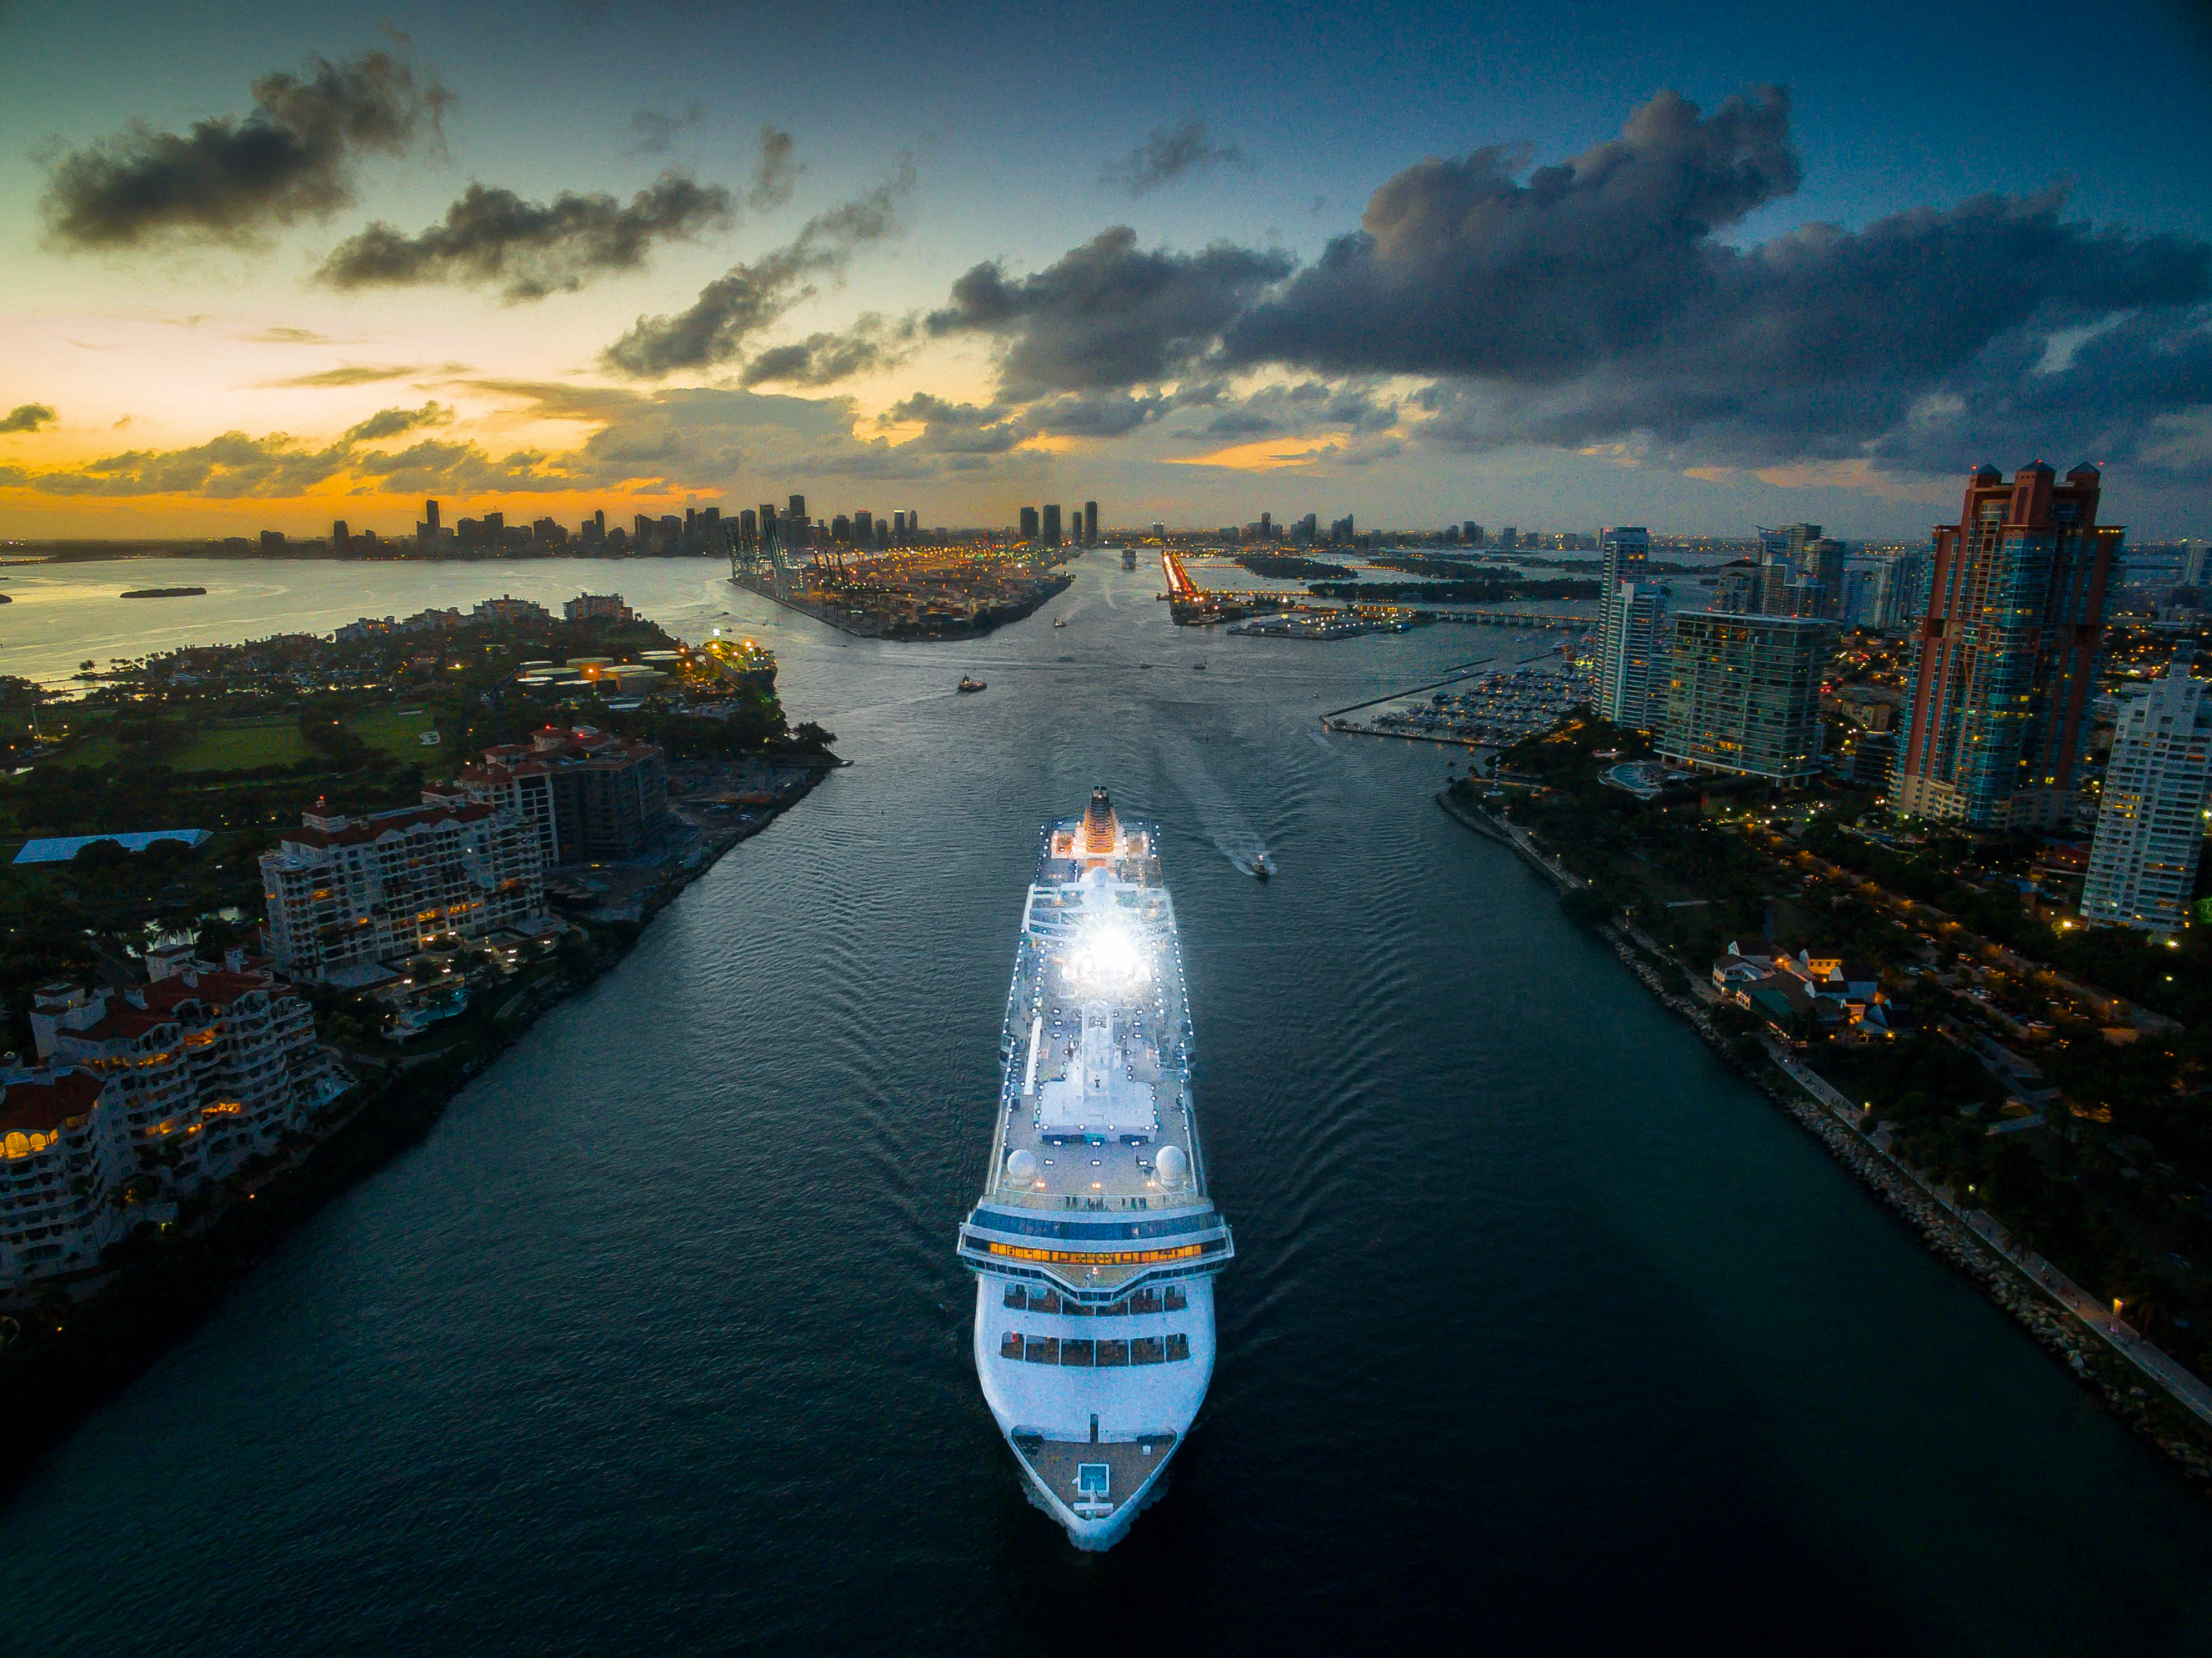 A cruise ship in Miami. Taken from 131 feet.